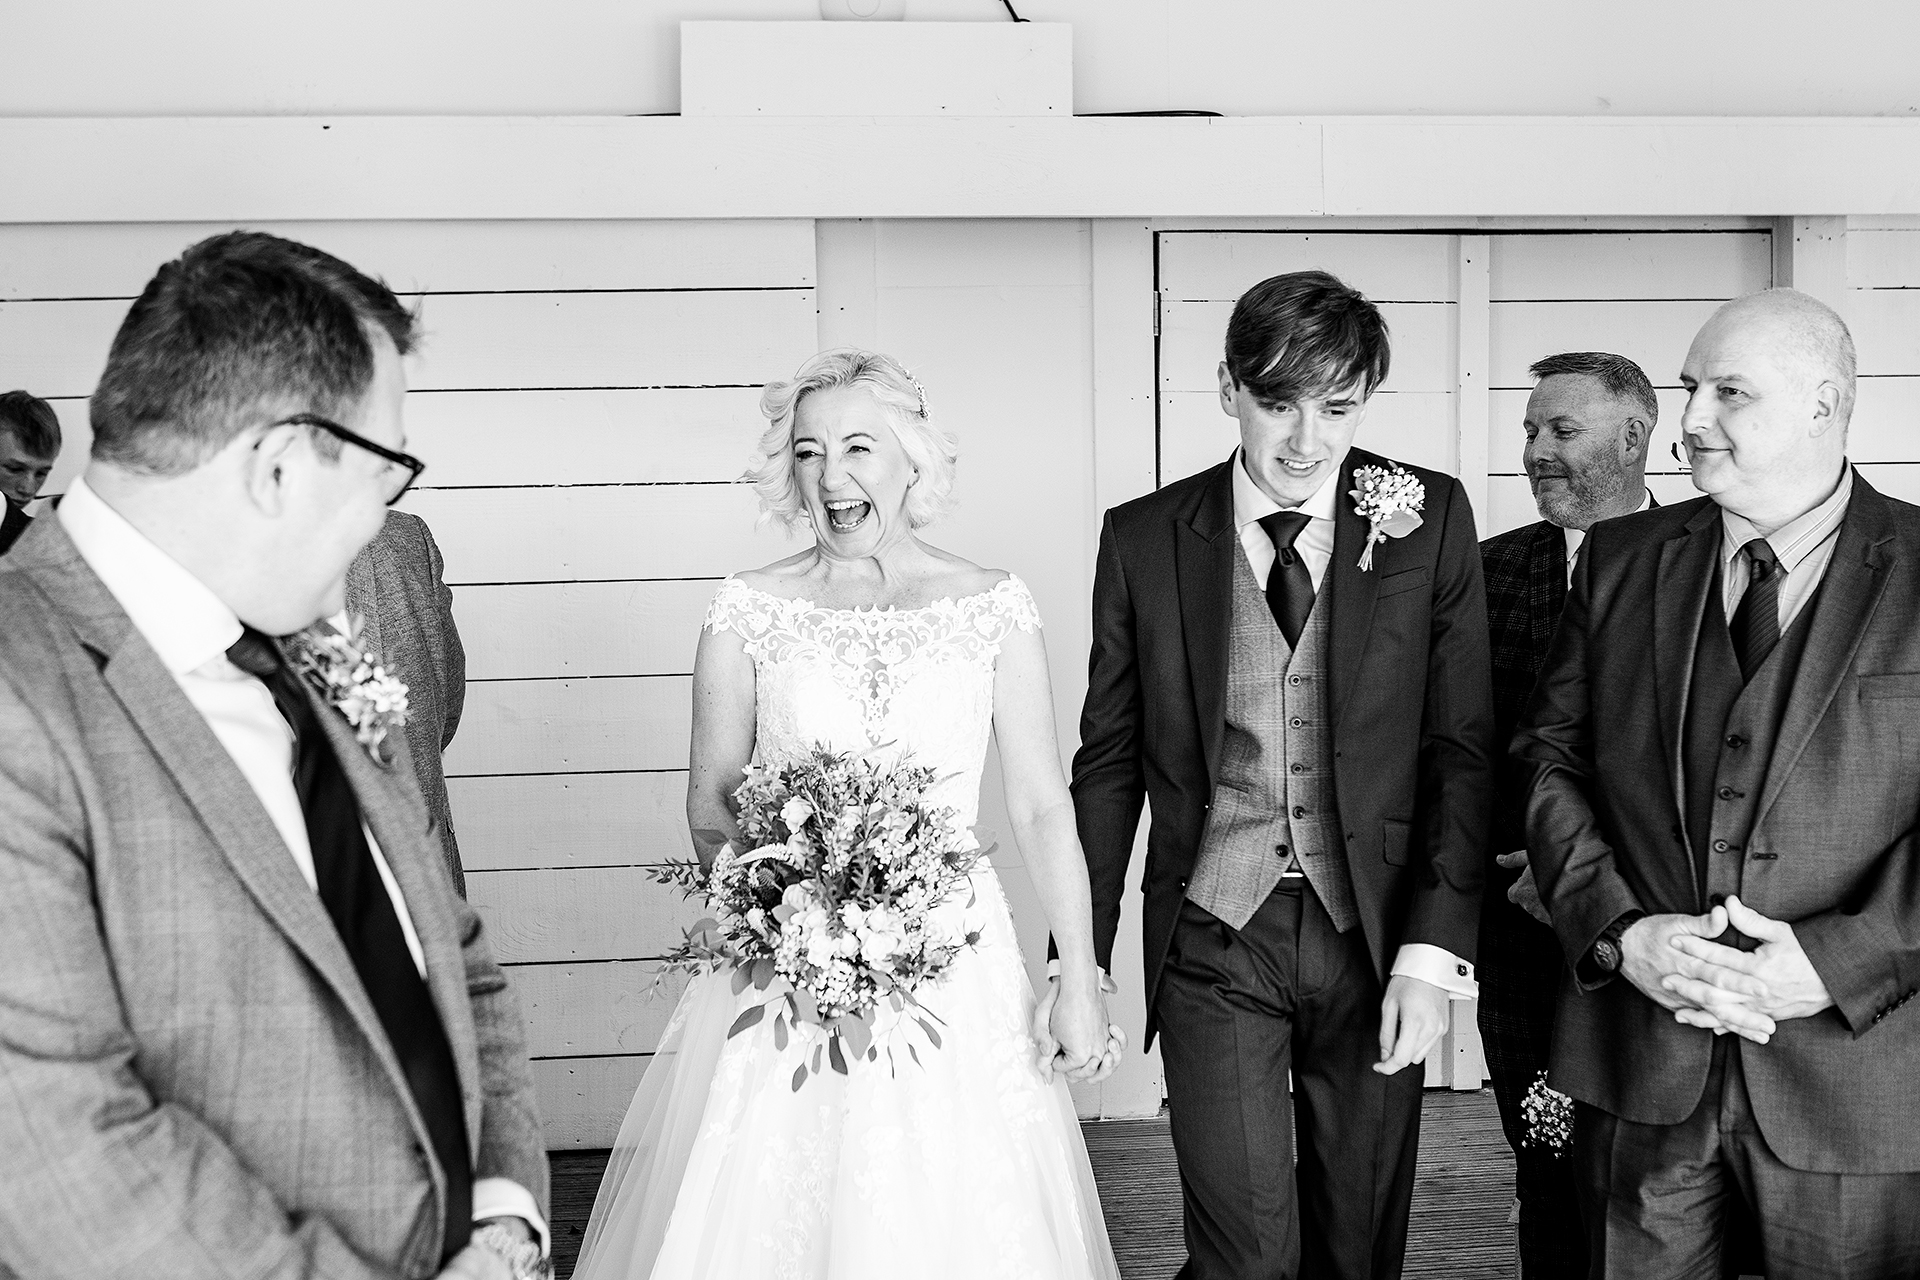 wedding photography in black and white shot at bash hall barn venue